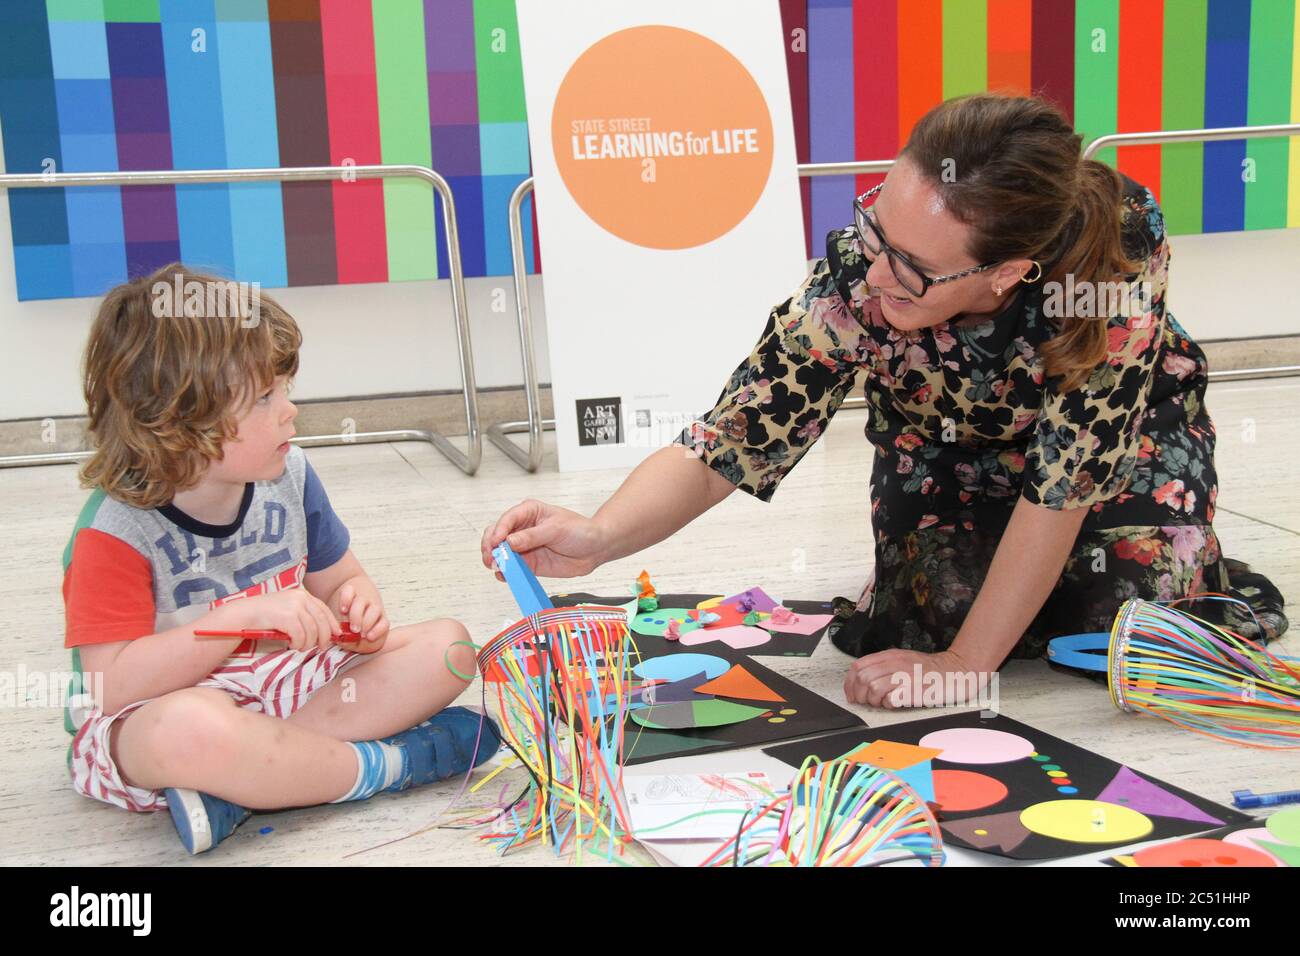 State Street Learning for Life program ambassador, artist Del Kathryn Barton plays with children at the launch event. Stock Photo